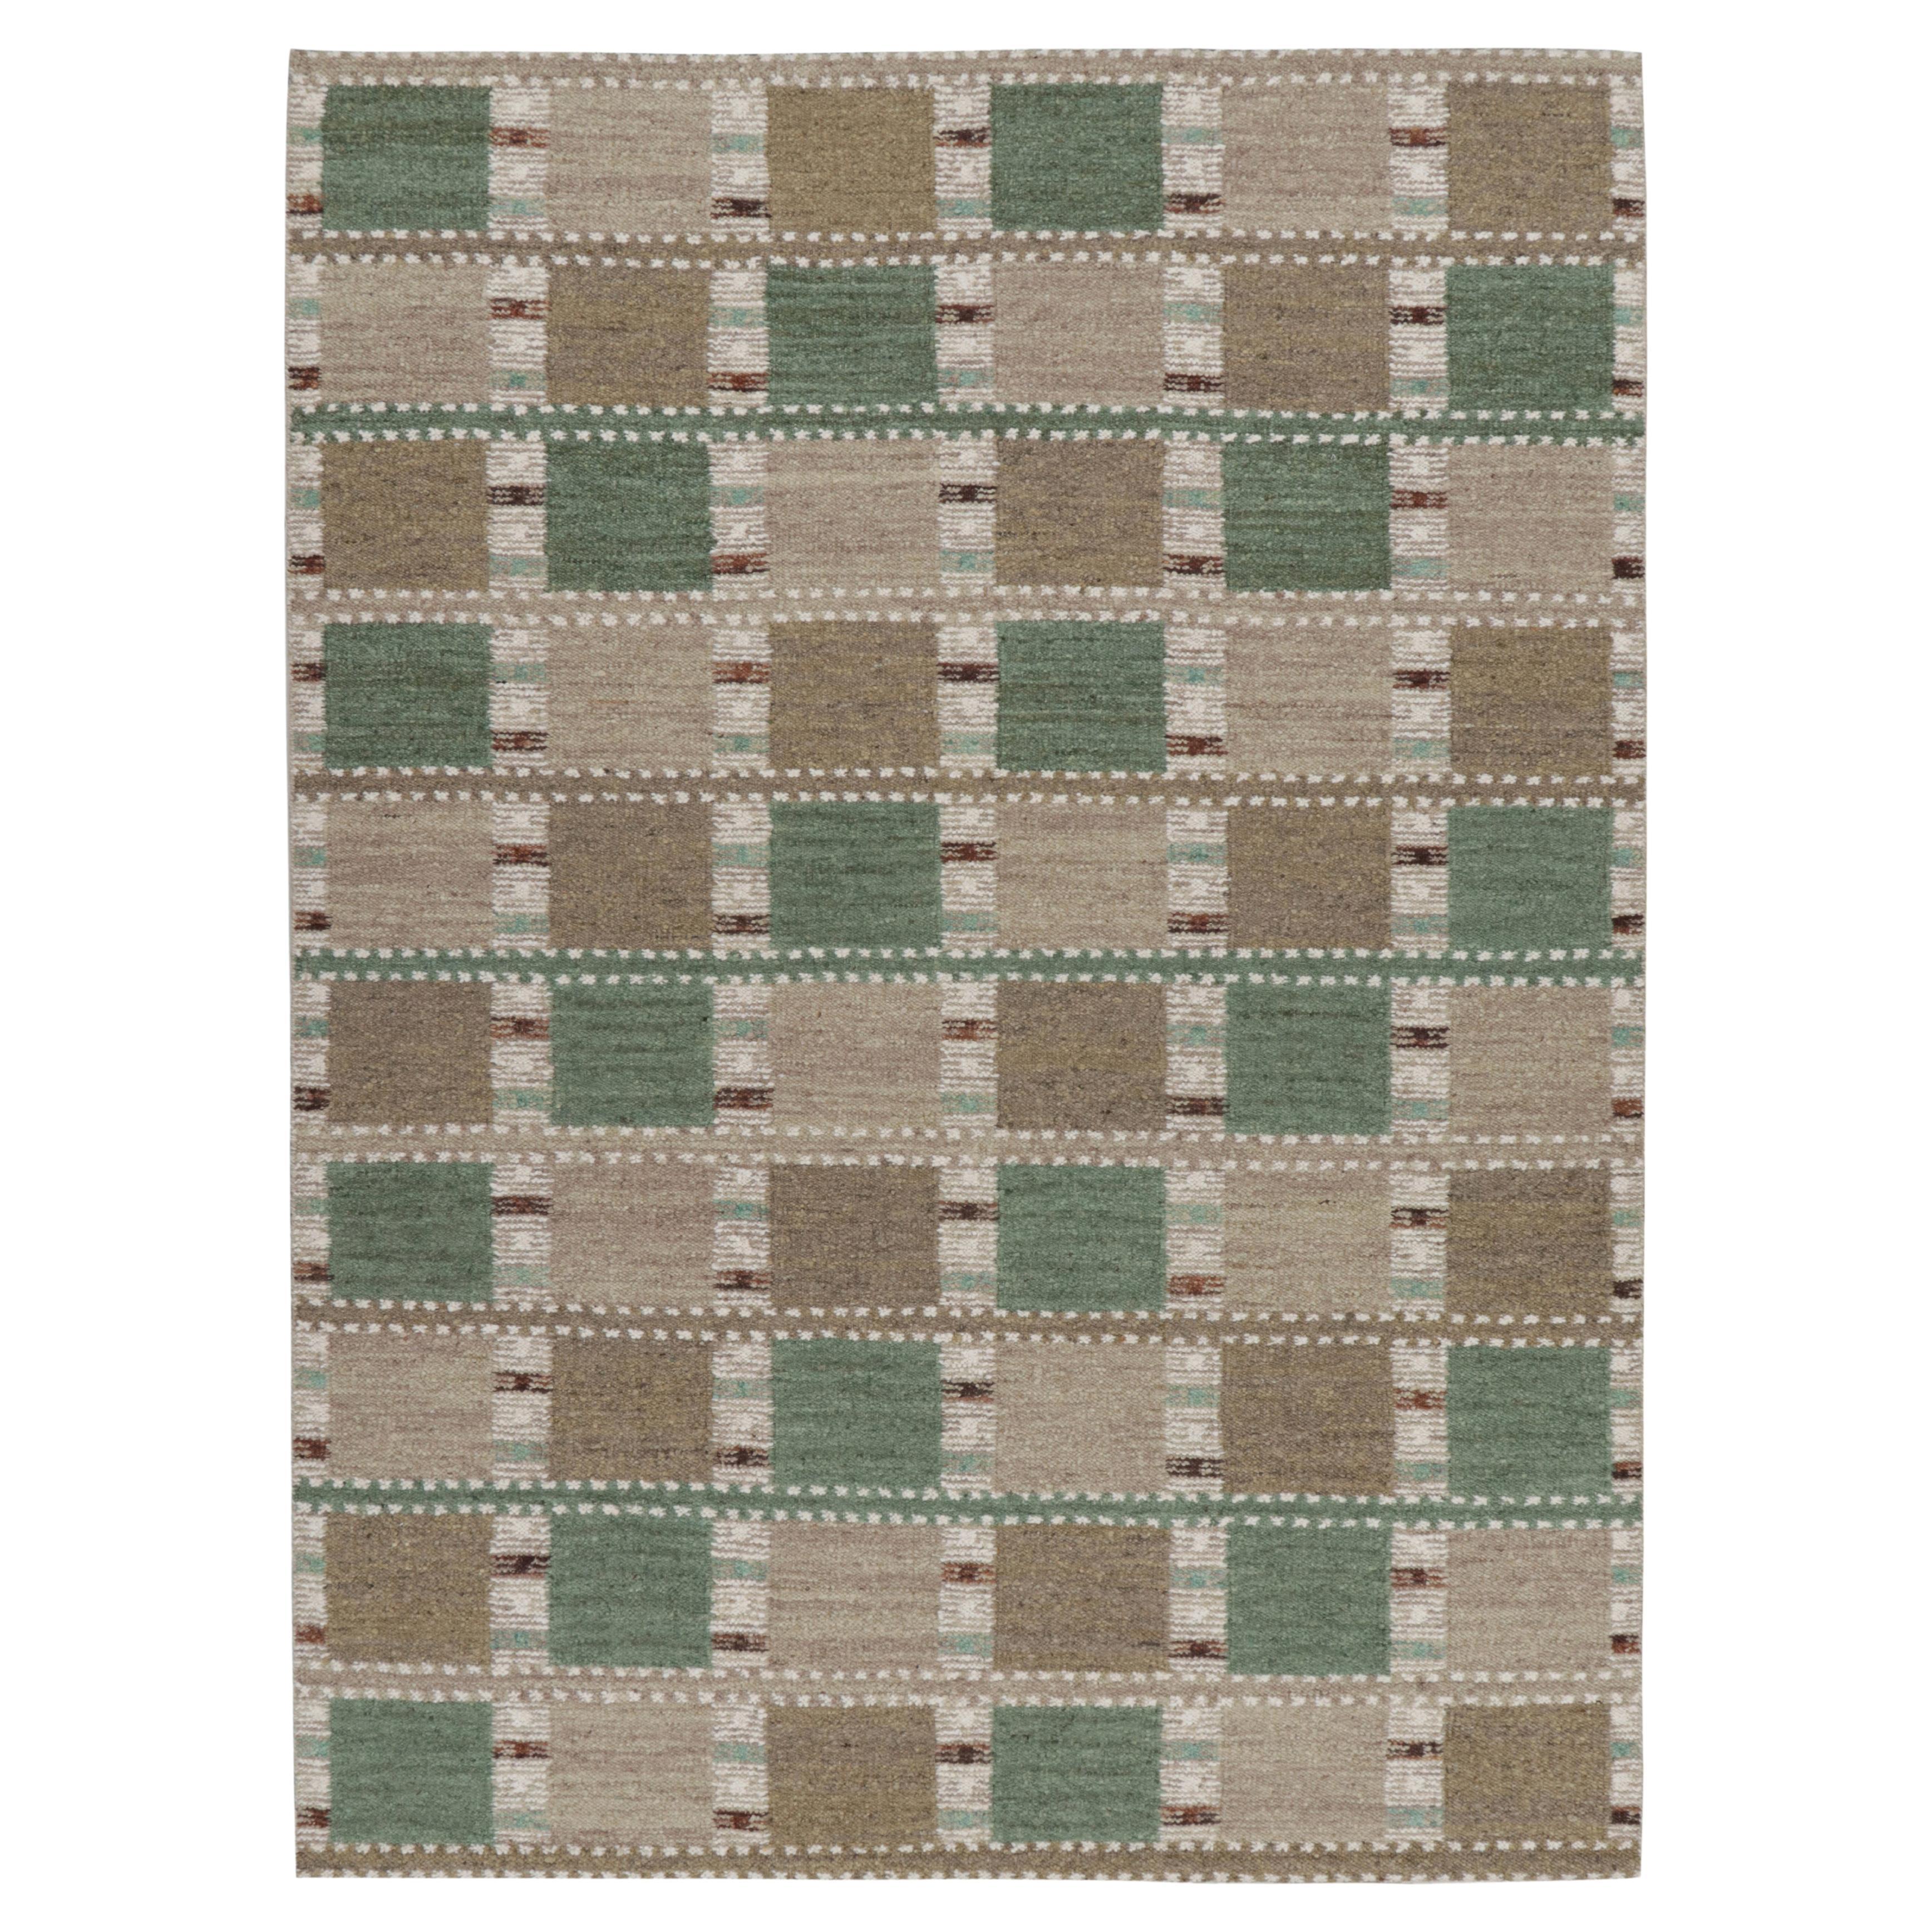 Rug & Kilim’s Scandinavian Style Rug in Green and Beige-Brown with Patterns For Sale